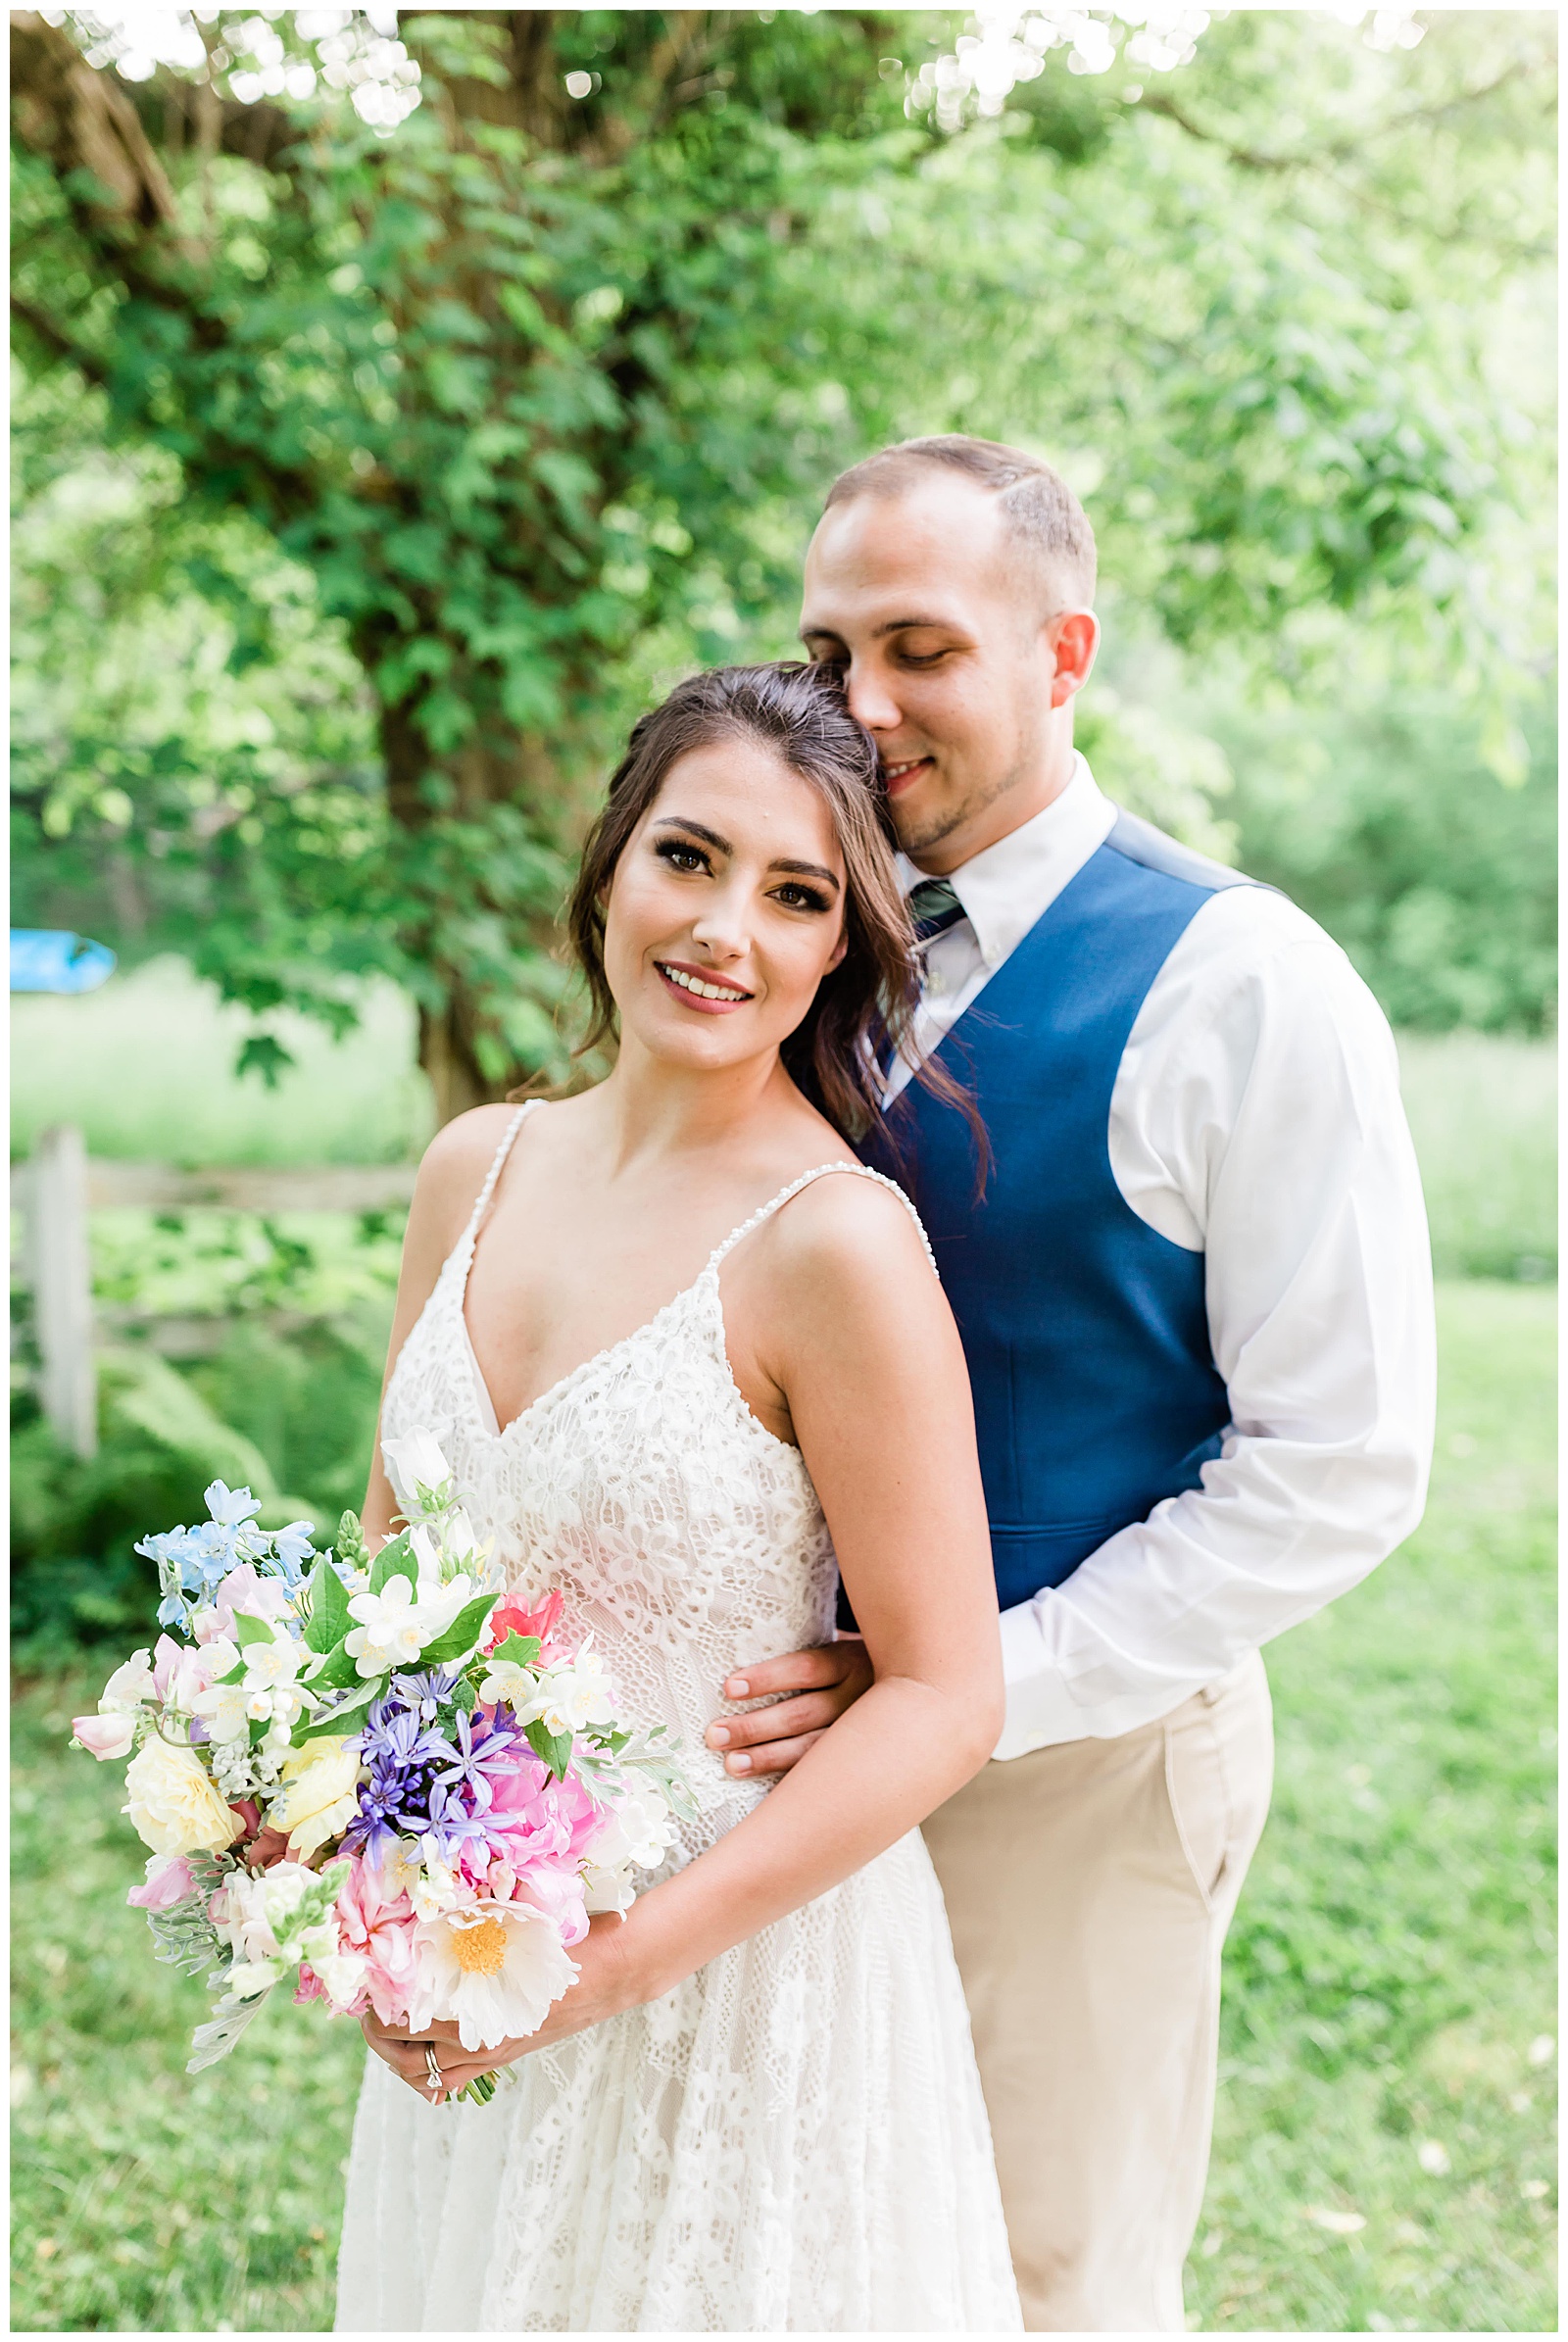 A dark haired woman smiles directly at the camera in a white wedding dress with a large bouquet of flowers while a tall man in a suit stands behind her embracing her and kissing her temple outside at The Side Porch in Johnson City